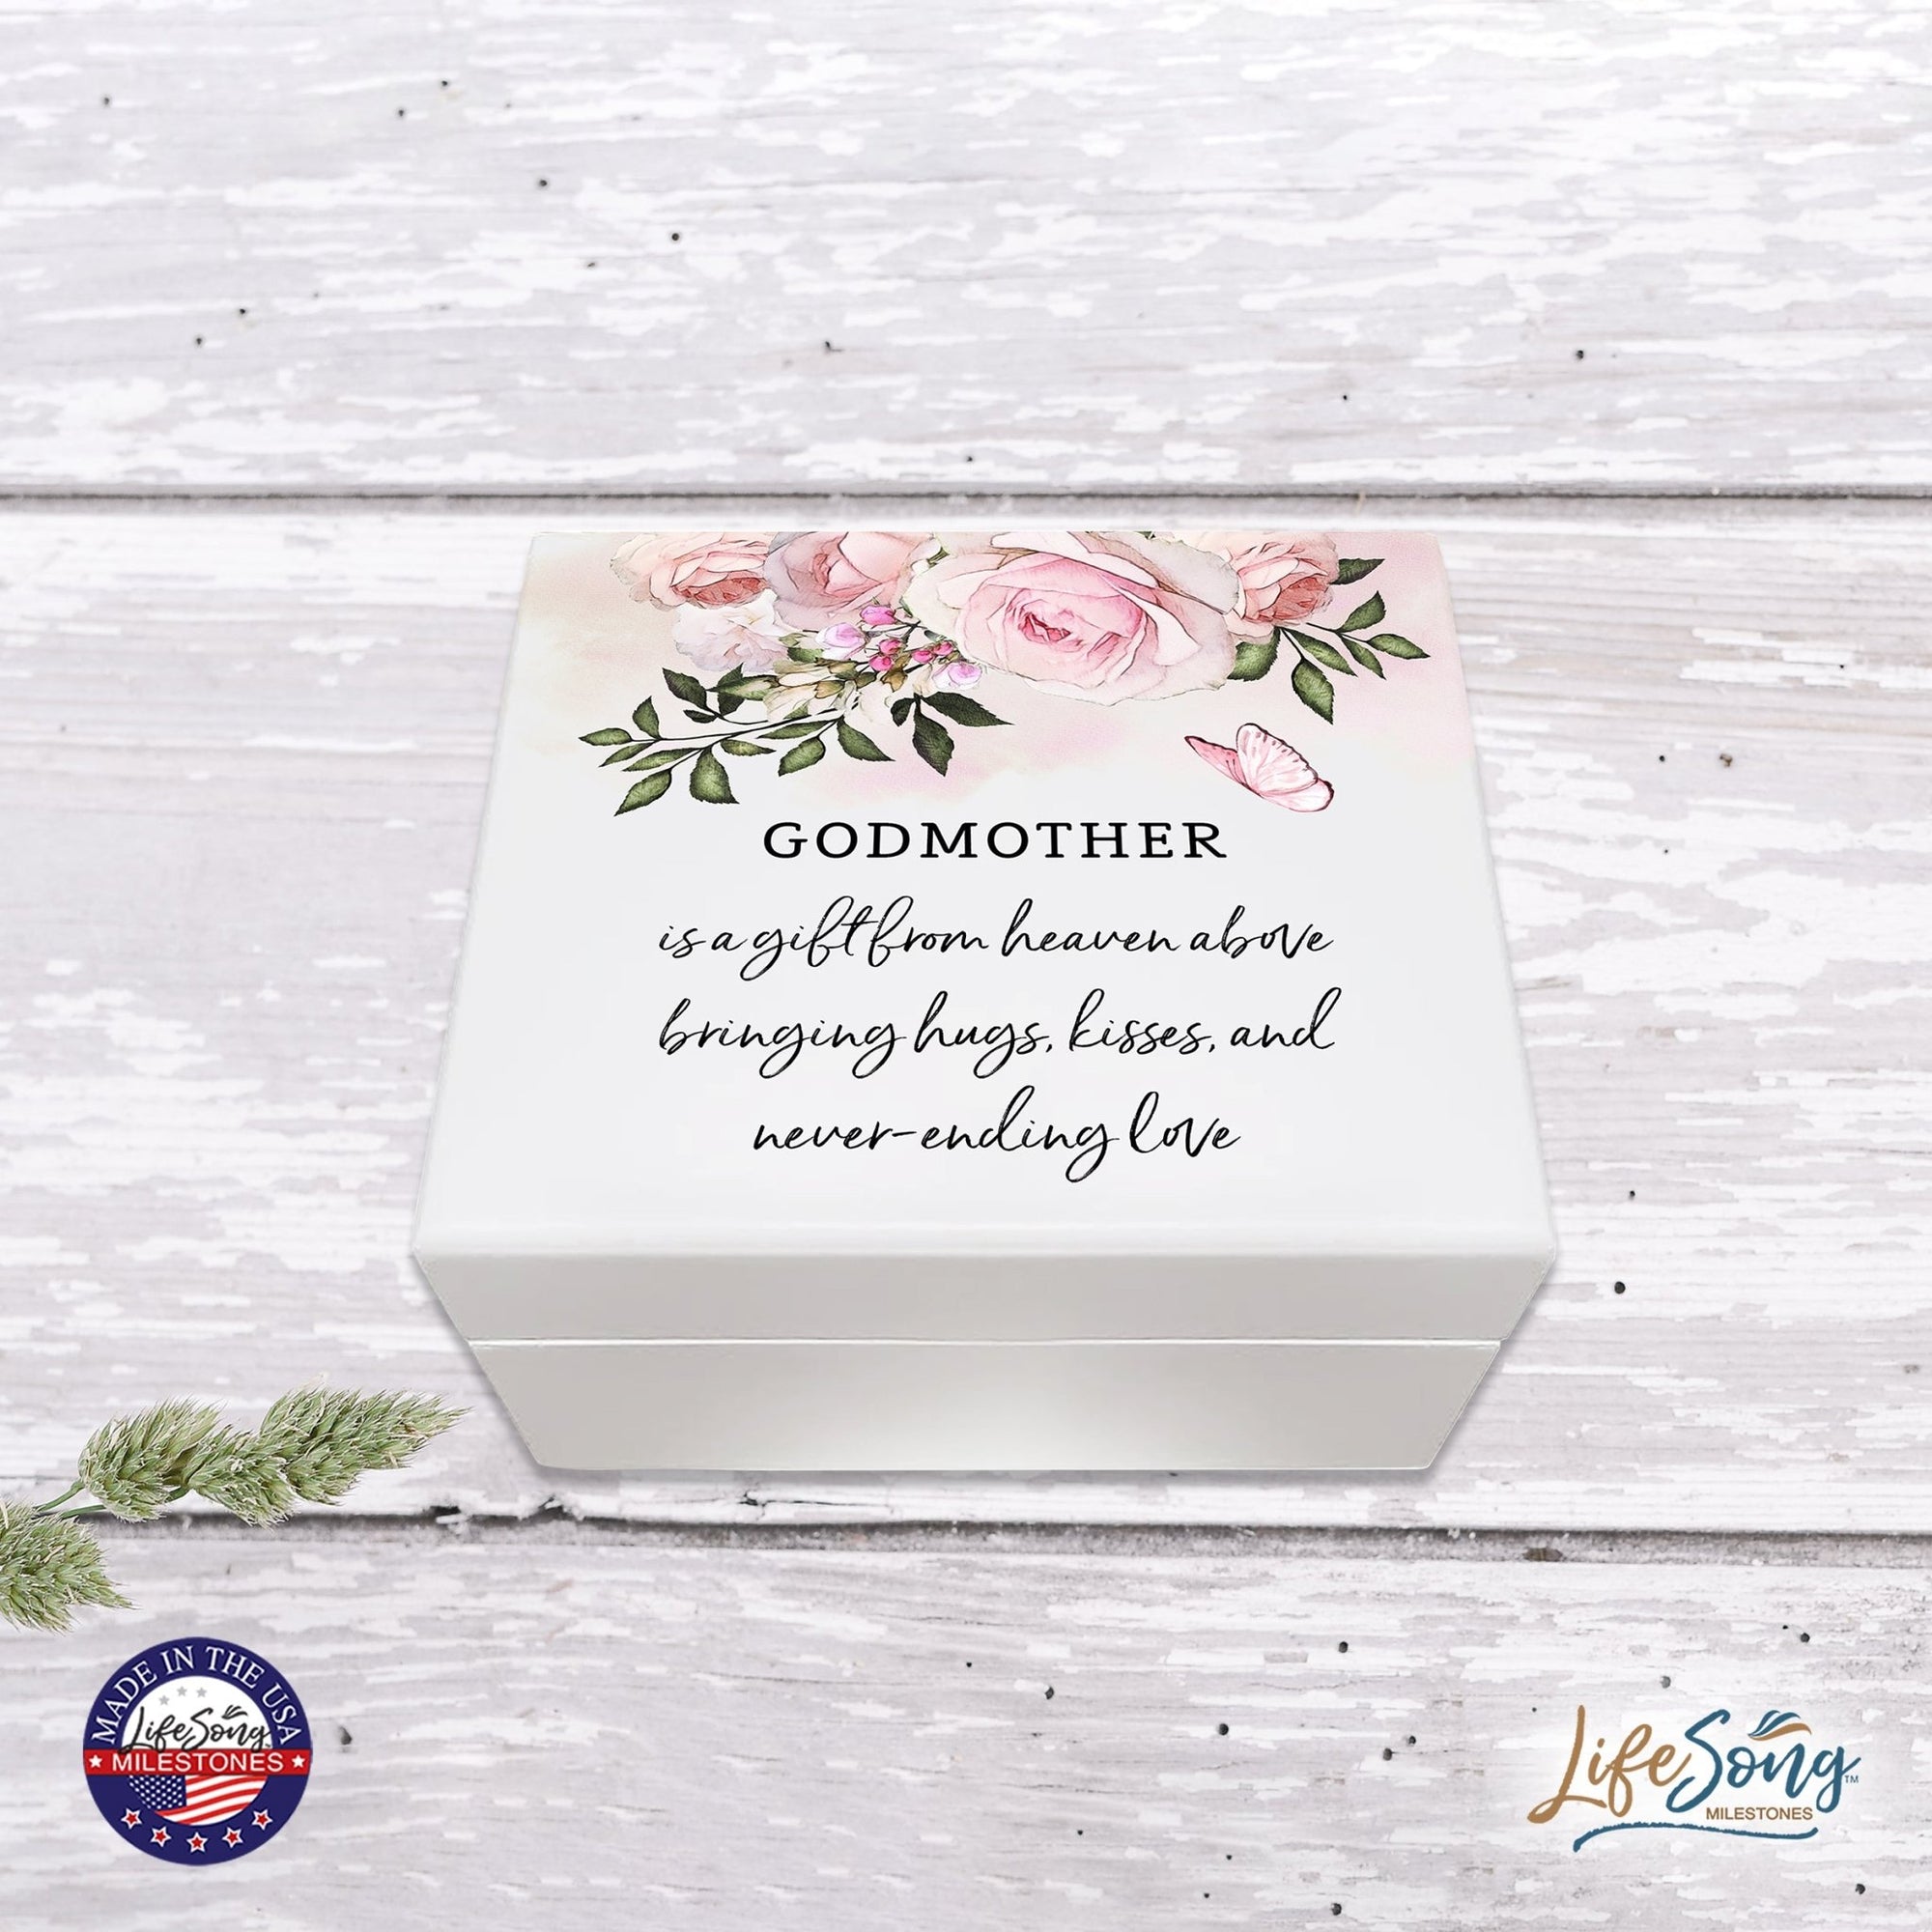 Jewelry Keepsake Box for GodMother From Goddaughter 6x5.5in - Is A gift From Heaven - LifeSong Milestones